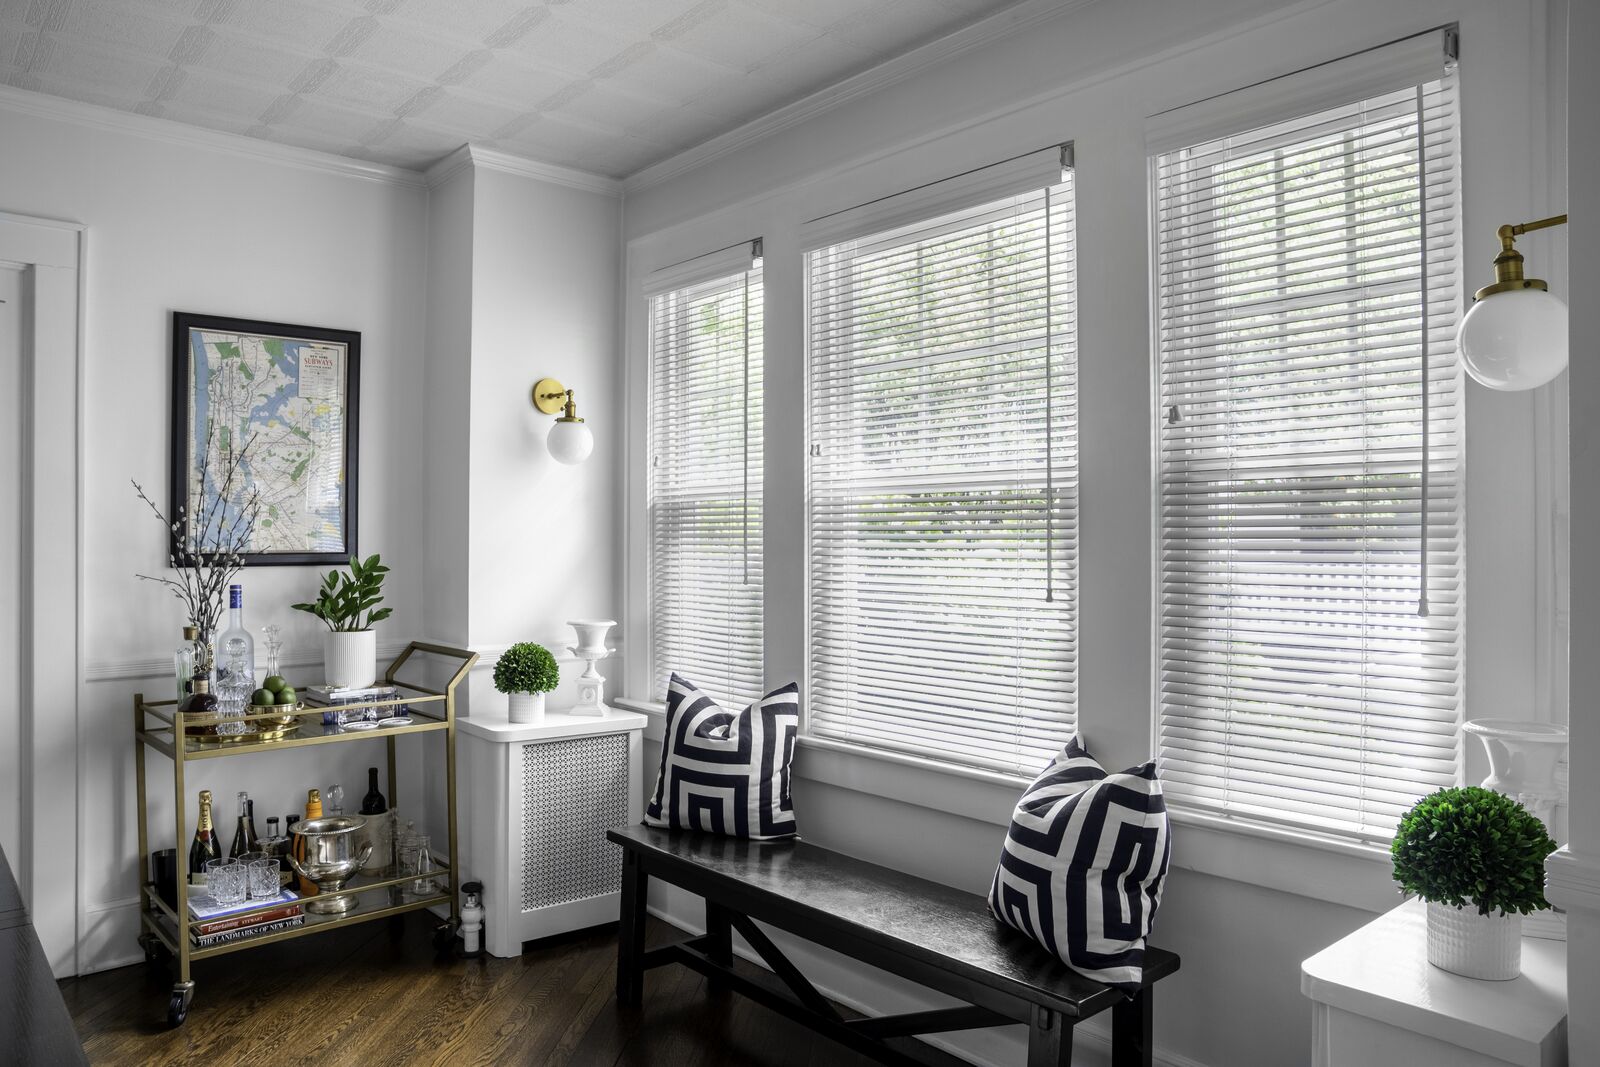 A modern front room with large windows is decorated with wooden blinds.